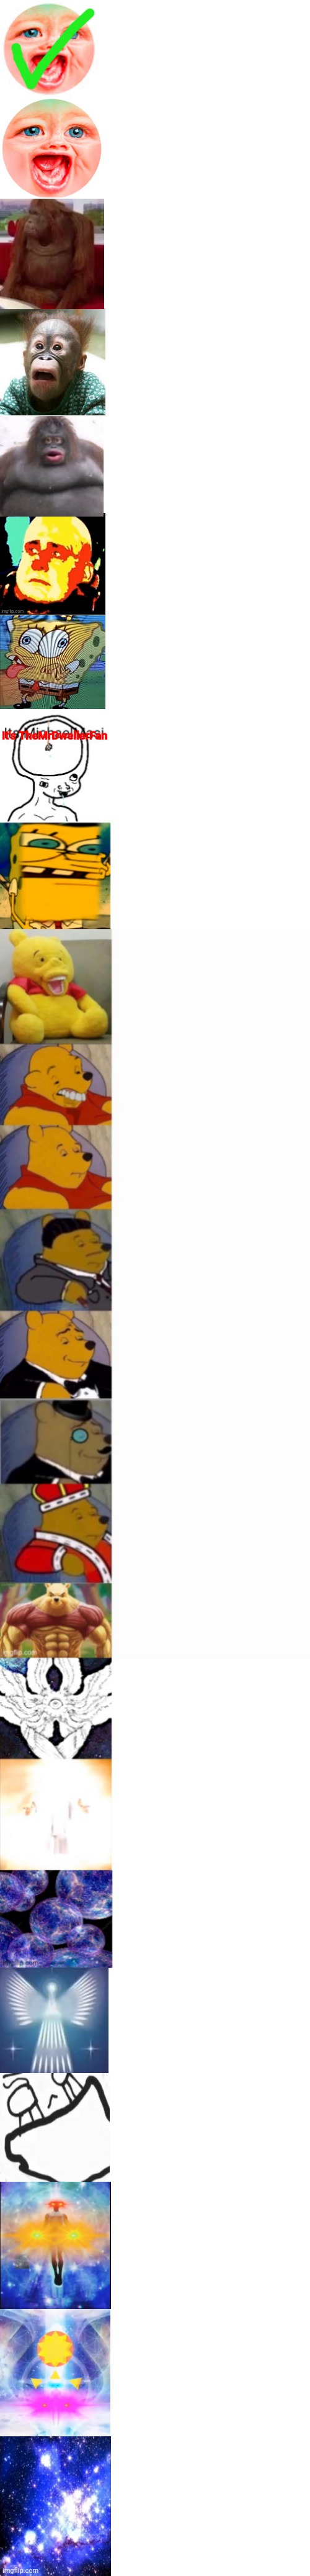 Tuxedo Winnie the Pooh Giga Extended (25 panels) | It's TheMrDwellerFan | image tagged in memes,blank transparent square,tuxedo winnie the pooh super extended | made w/ Imgflip meme maker